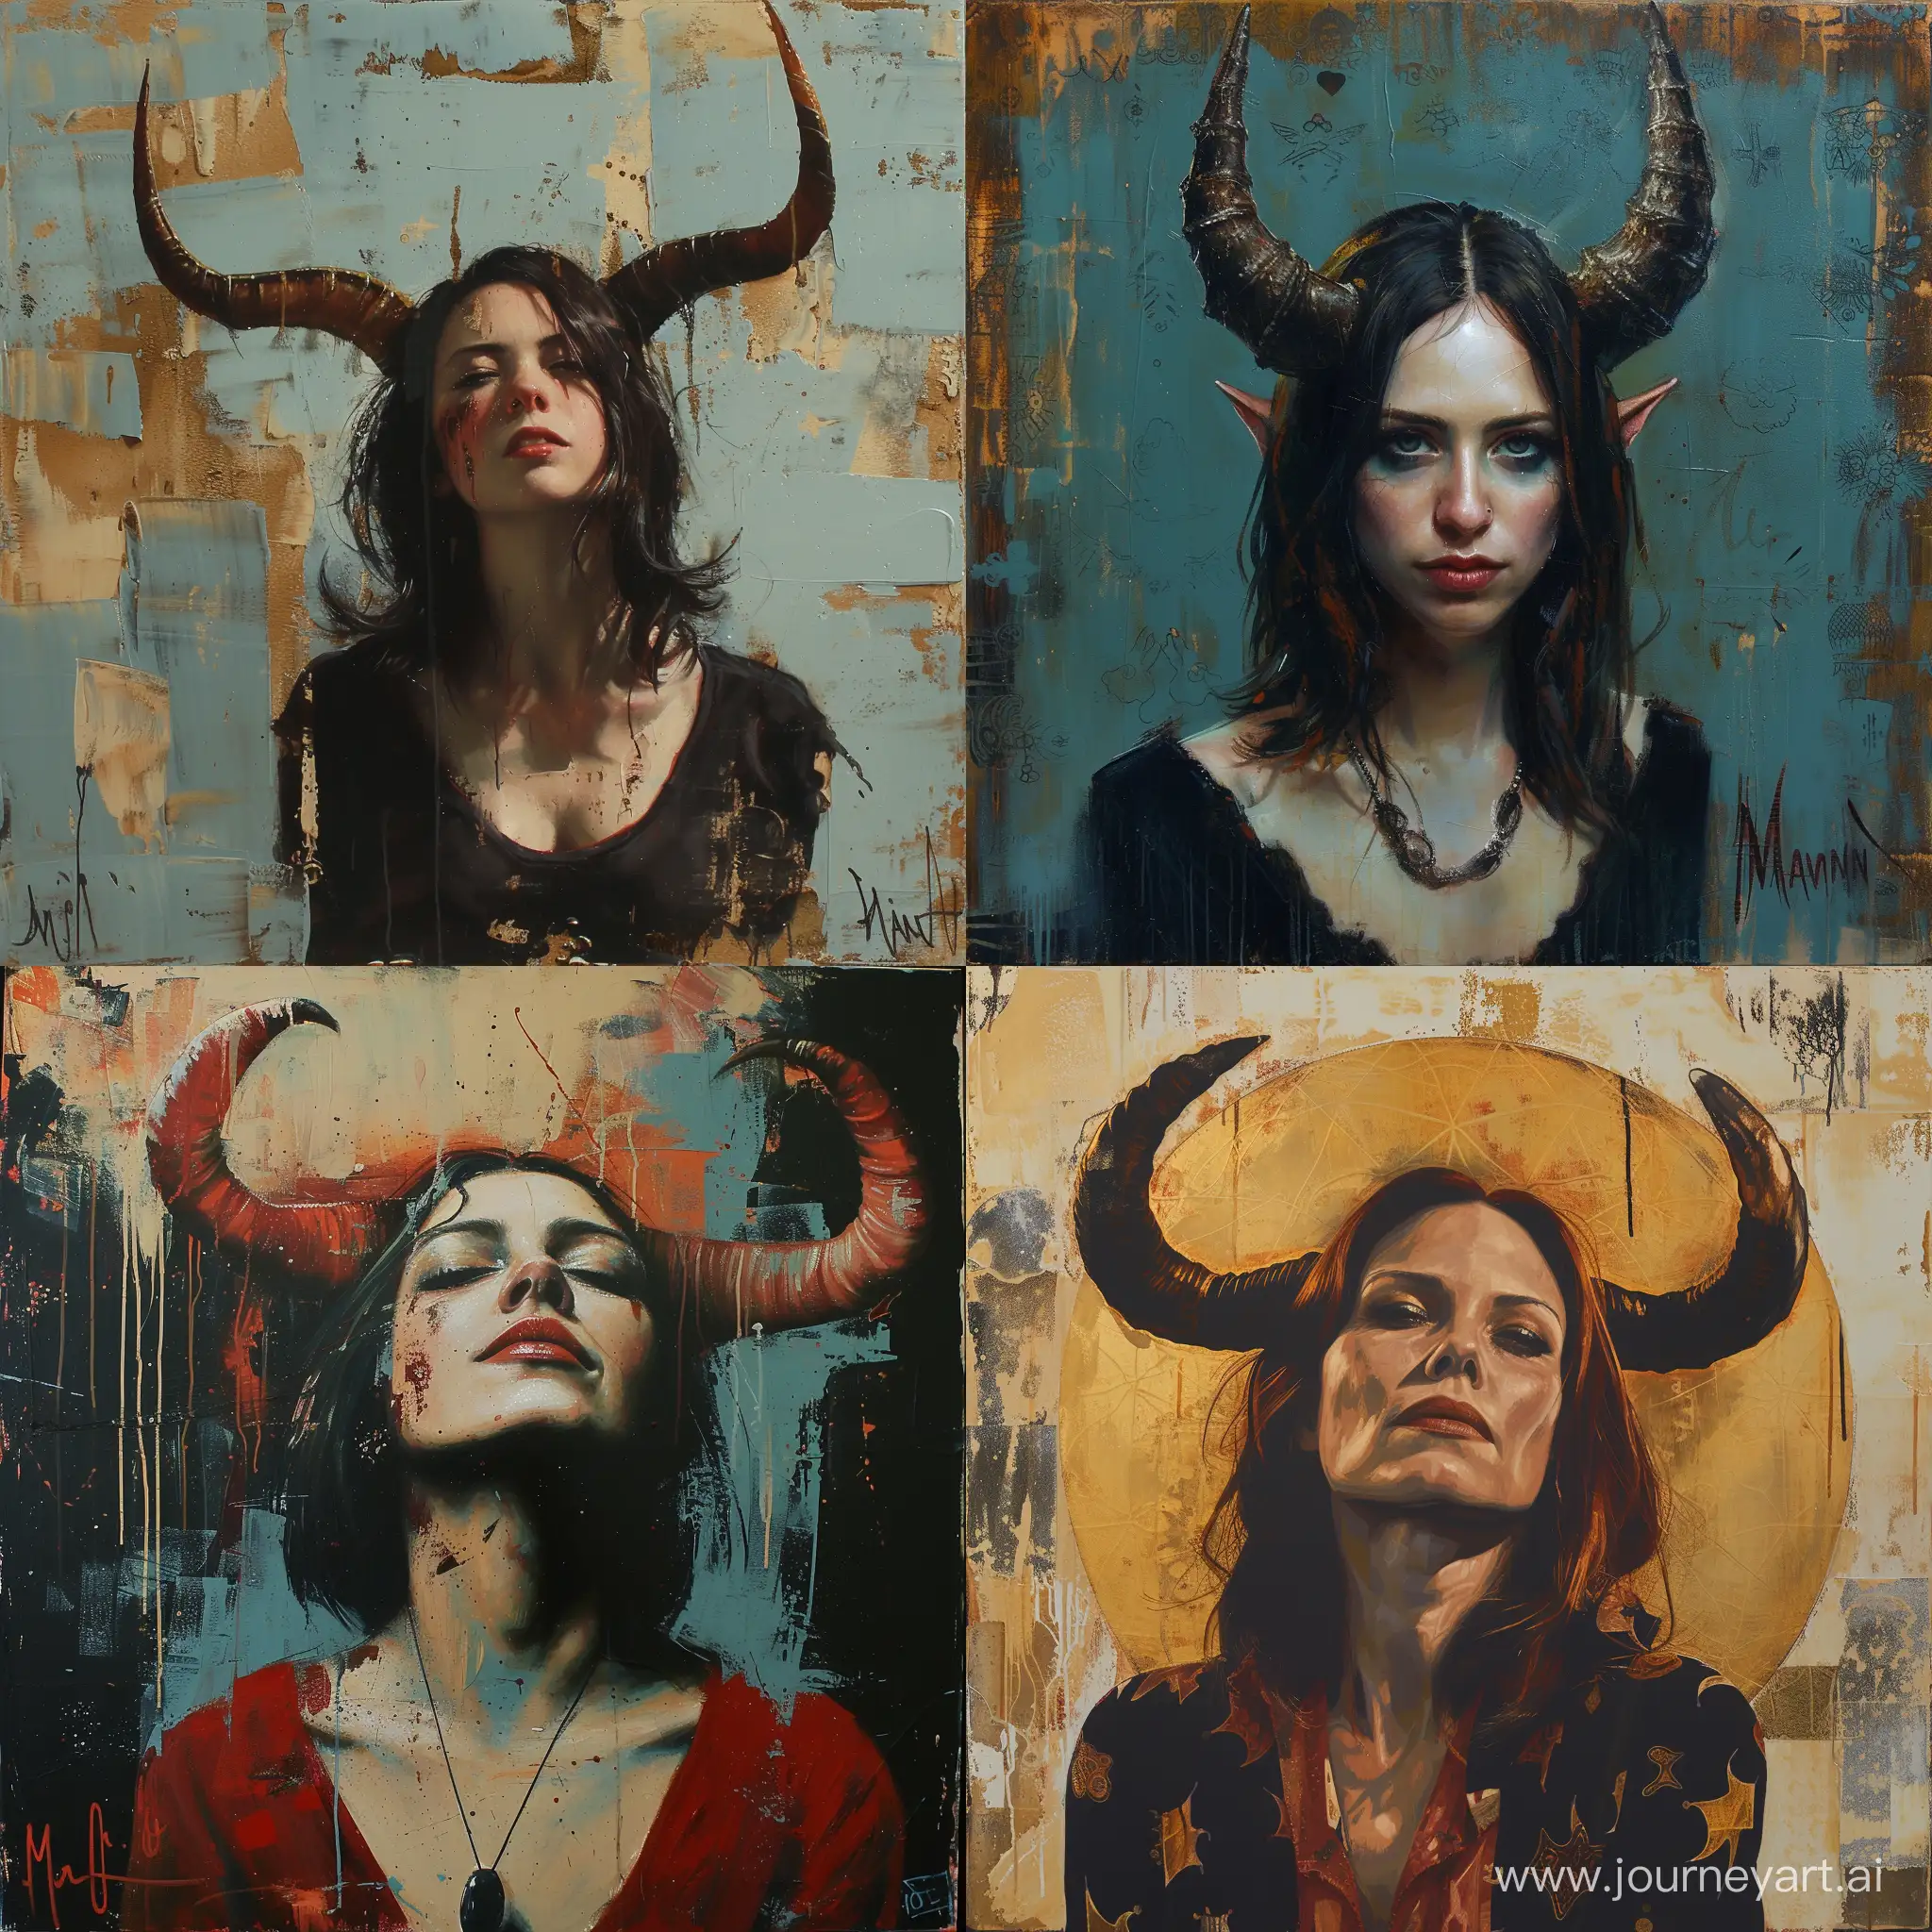 a painting of a woman with horns on her head, a fine art painting by George Manson, transgressive art